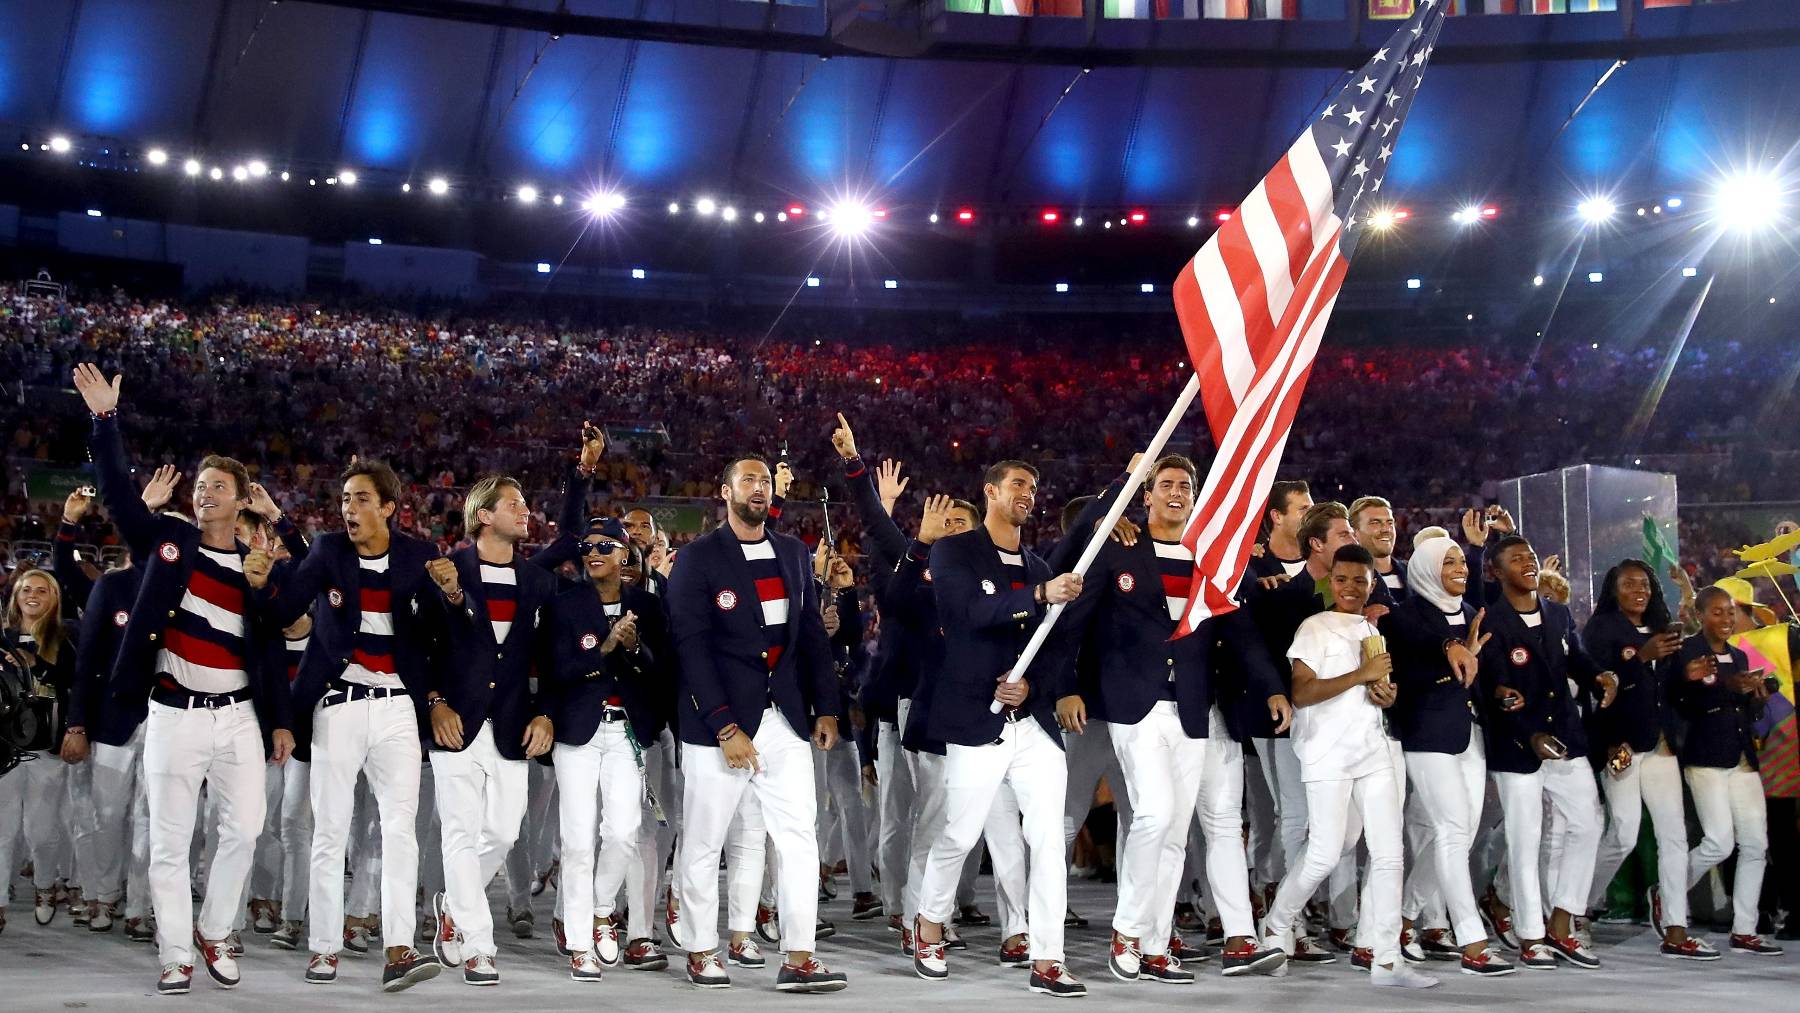 The Olympic Games in Tokyo will serve as a major marketing moment for brands like Ralph Lauren.